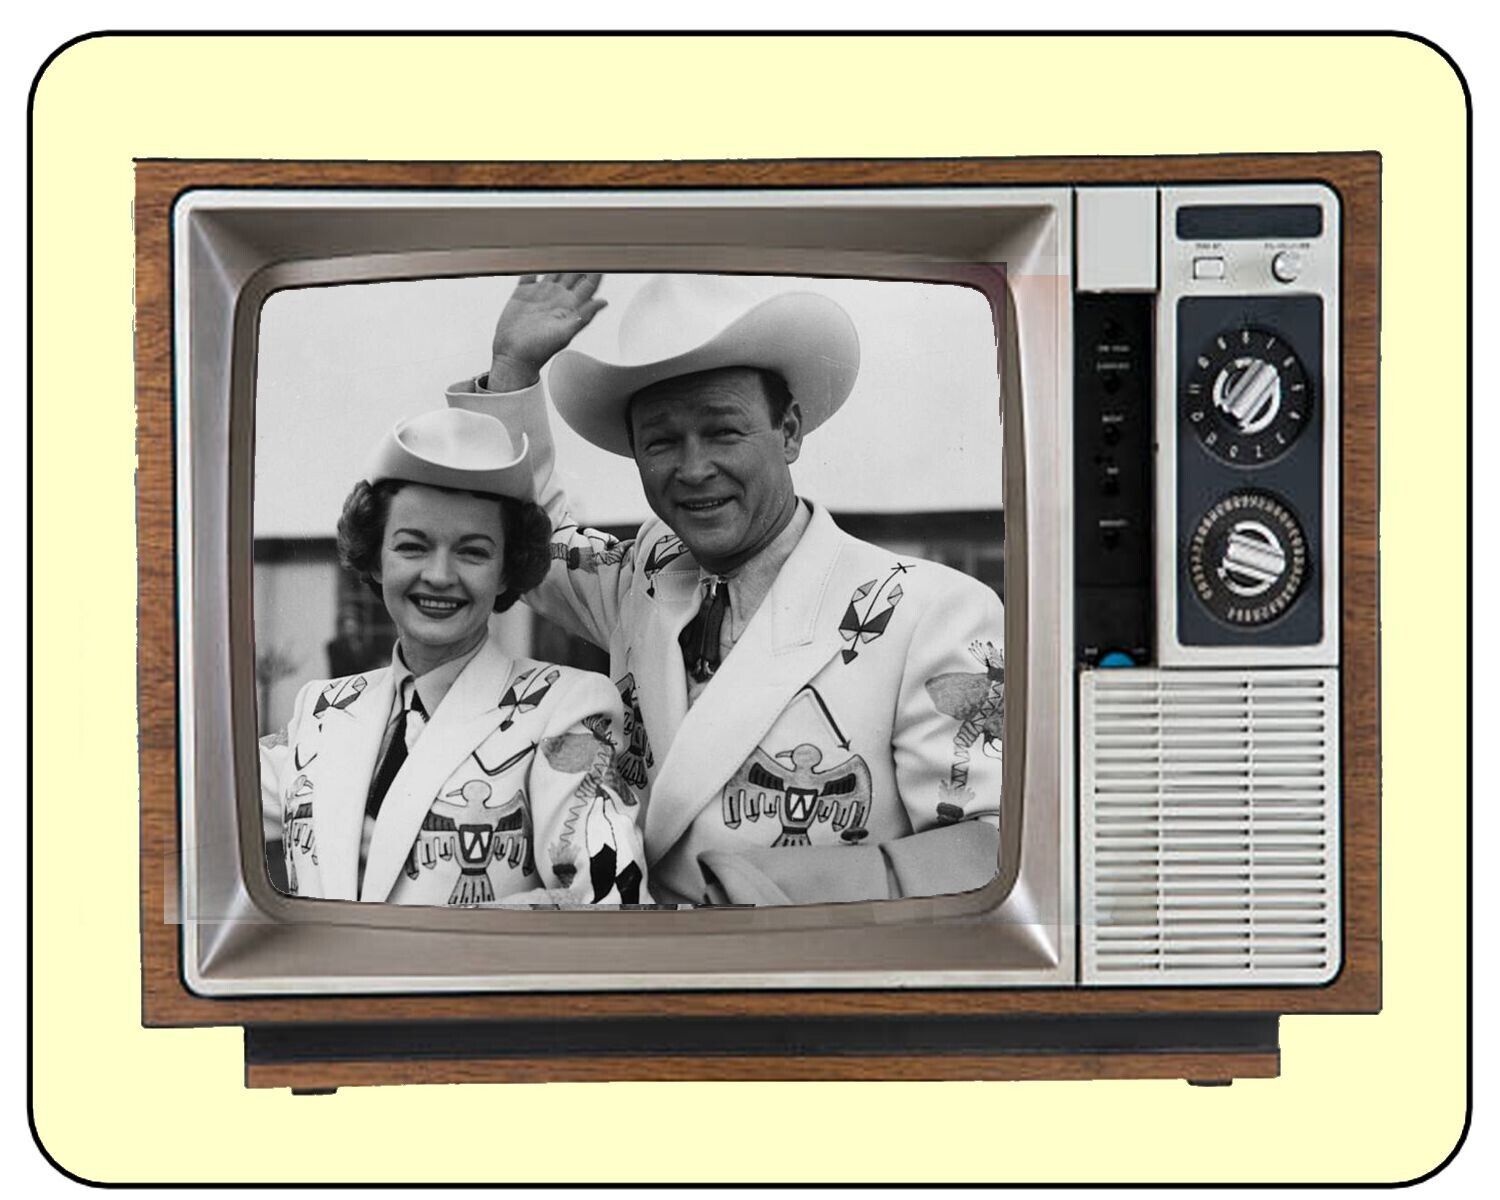 Roy Rogers TV  Shows Mousepad Computer Mouse Pad Accessory 7 x 9